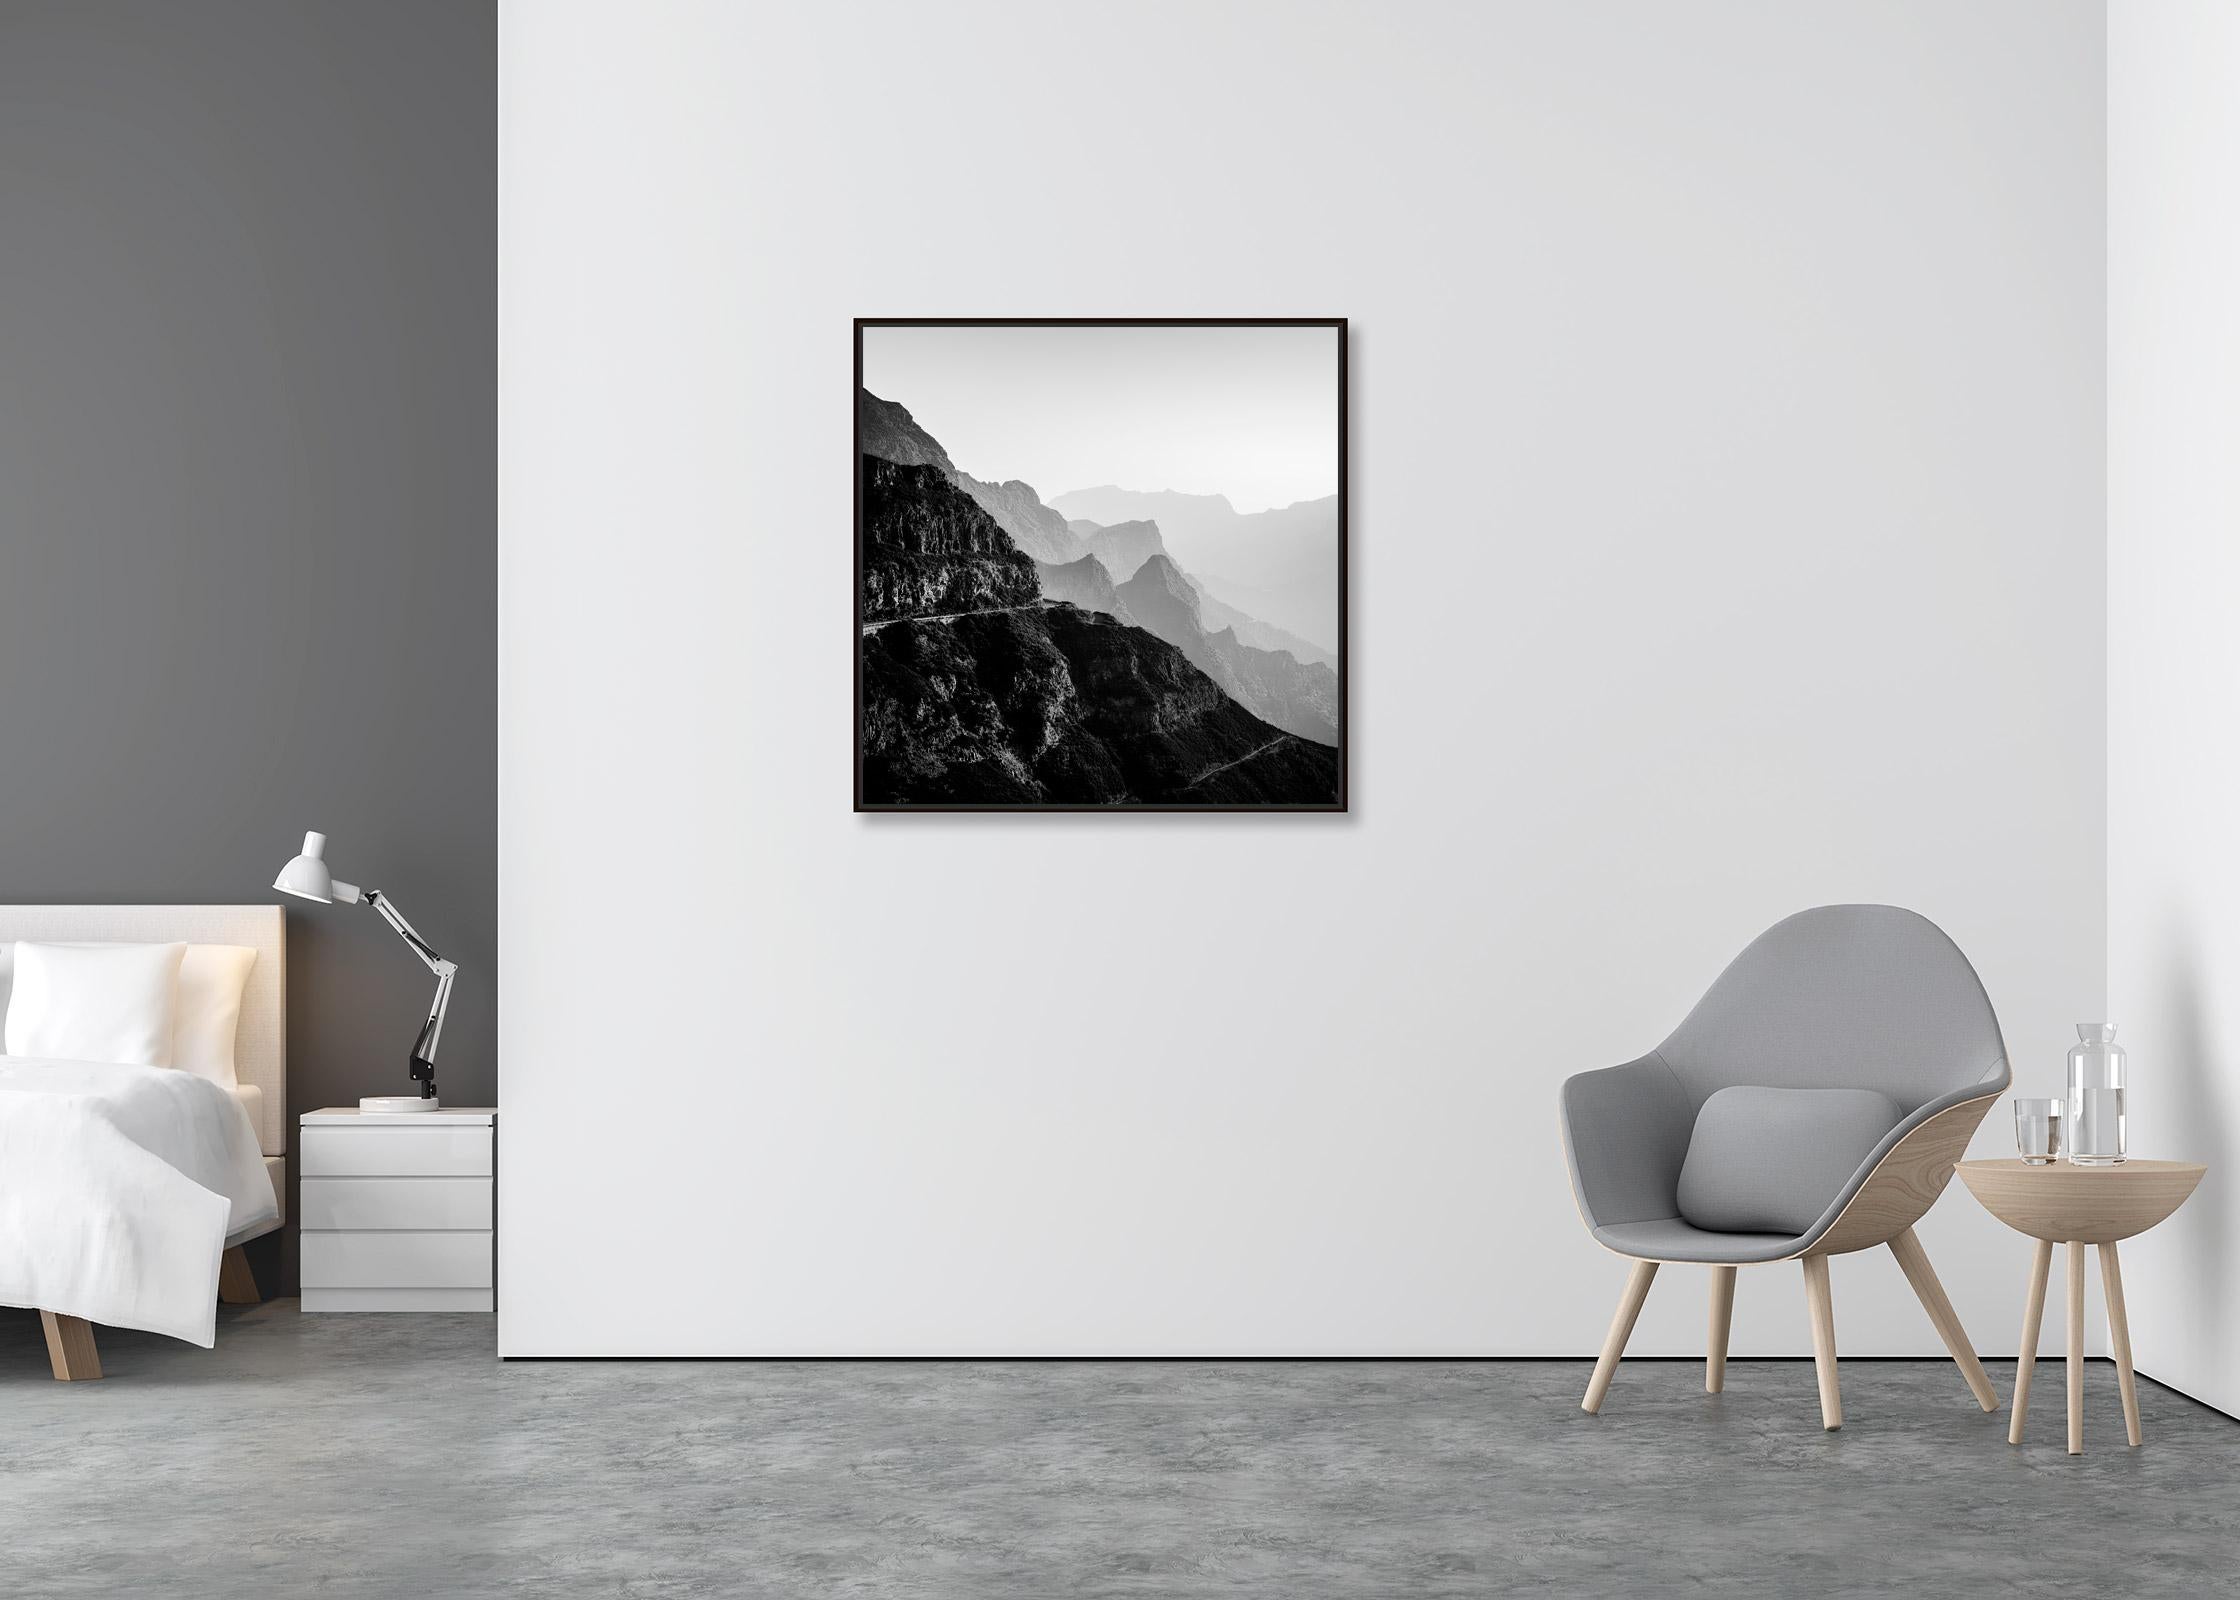 Madeira Peaks, morning Light, Fanal, Portugal, black white landscape photography - Minimalist Photograph by Gerald Berghammer